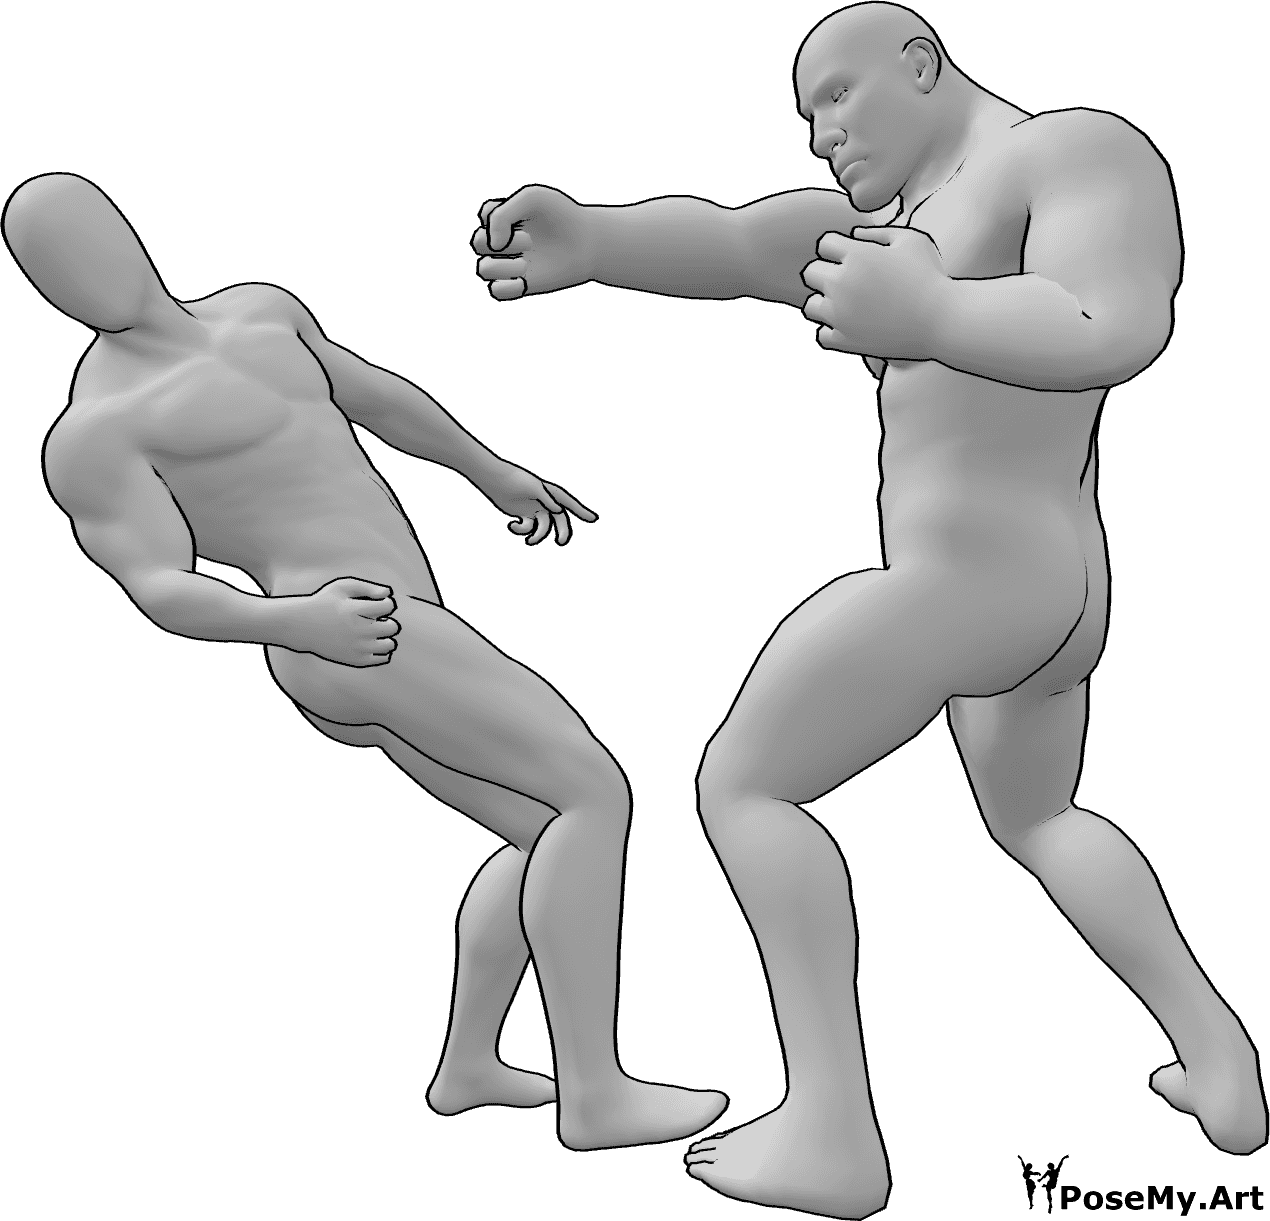 Pose Reference- Brute male fight pose - Brute male knocks out the other male and he falls backwards pose